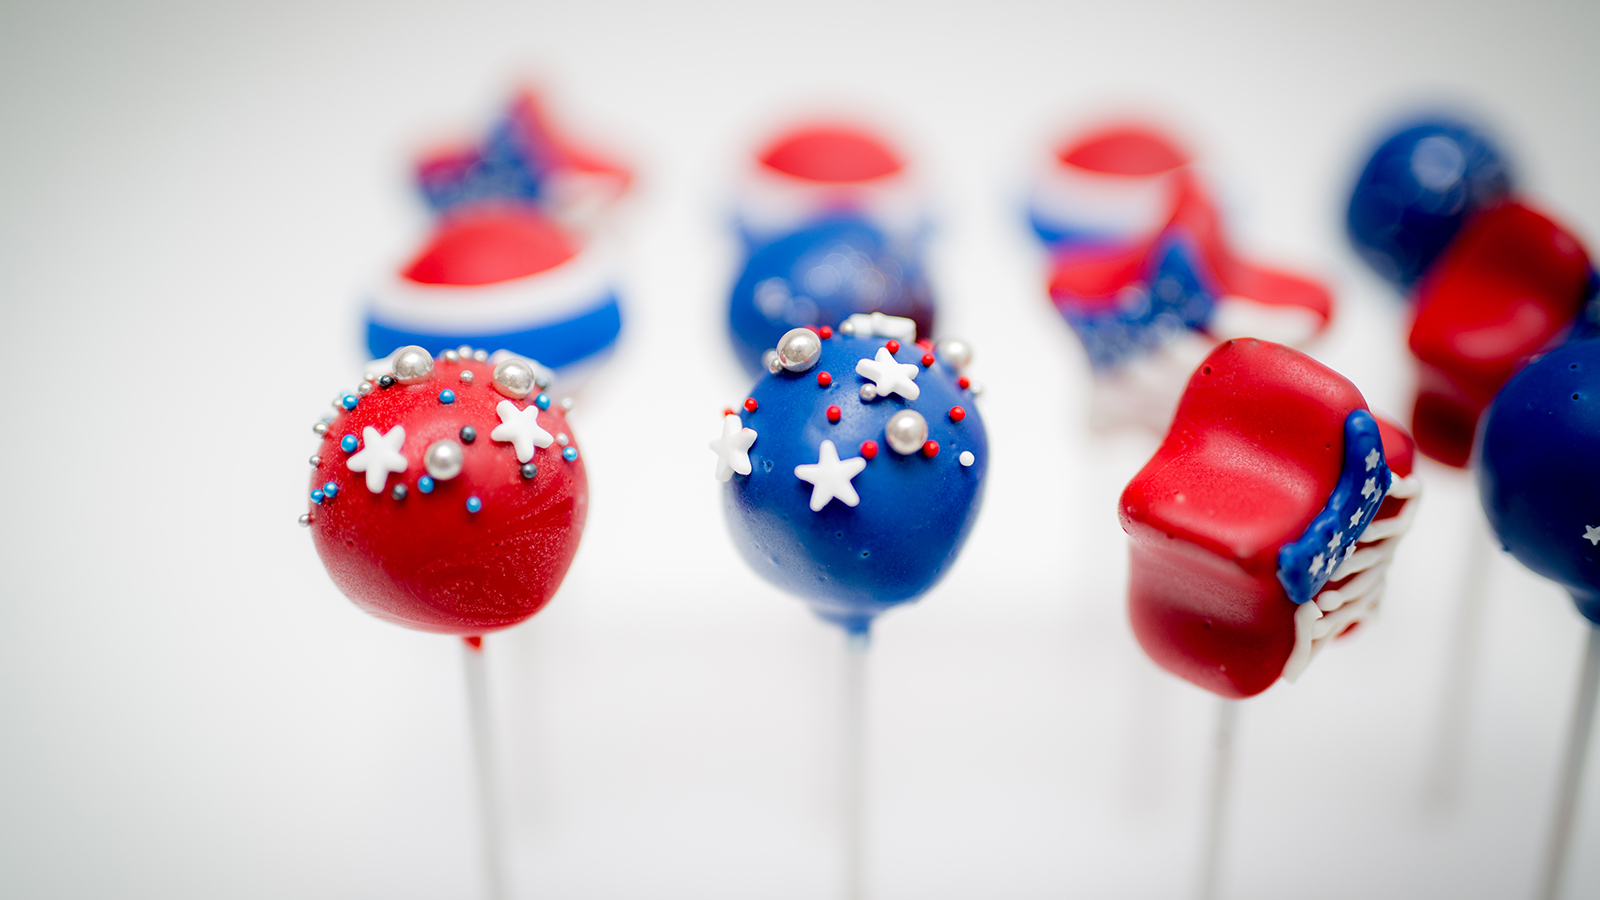 Vibrant red, white, and blue patriotic cake pops with a white background.